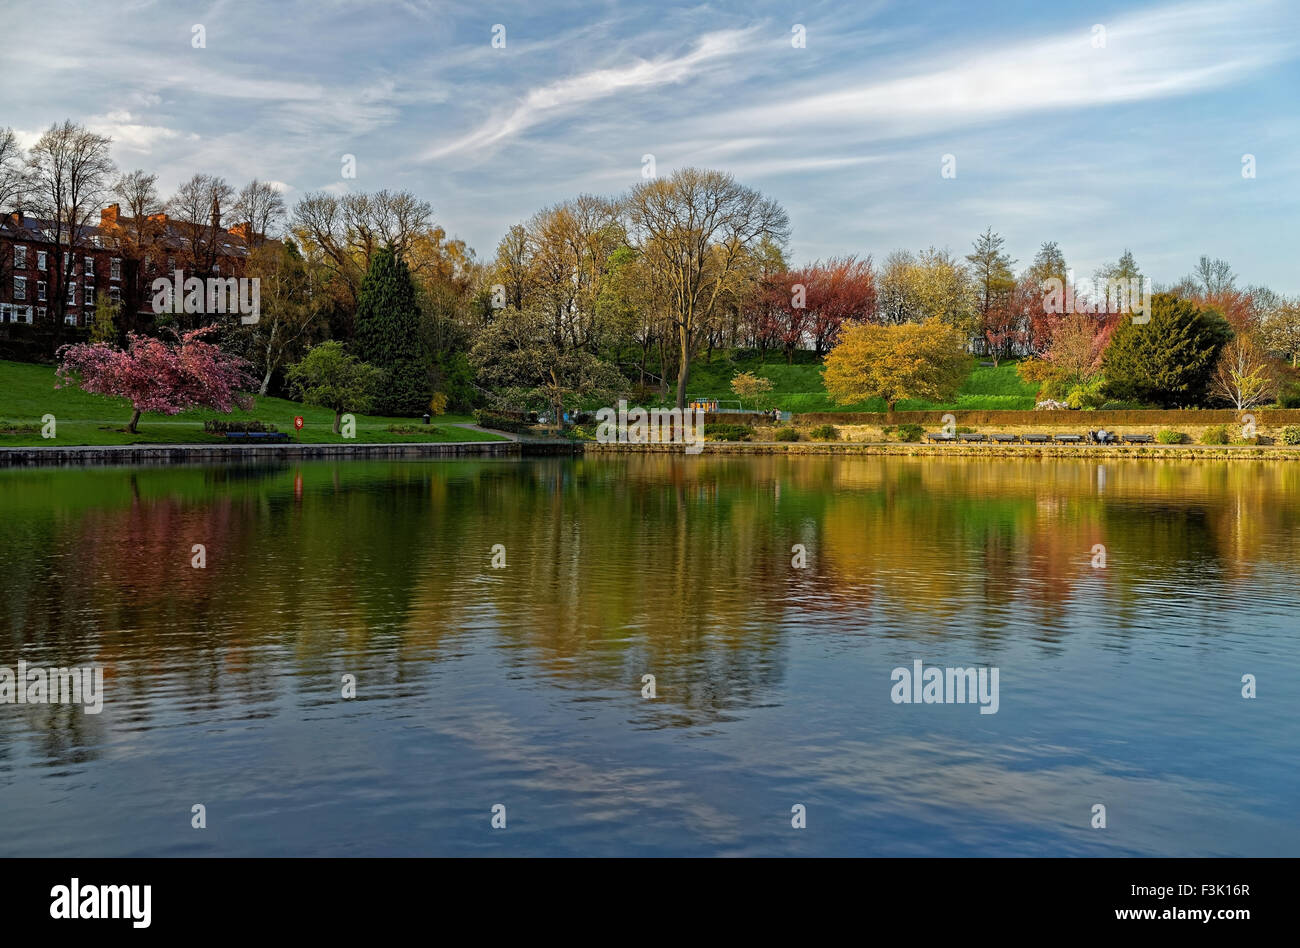 UK,South Yorkshire,Sheffield,Crookes Valley Park, Reflections of Trees & Blossom Stock Photo